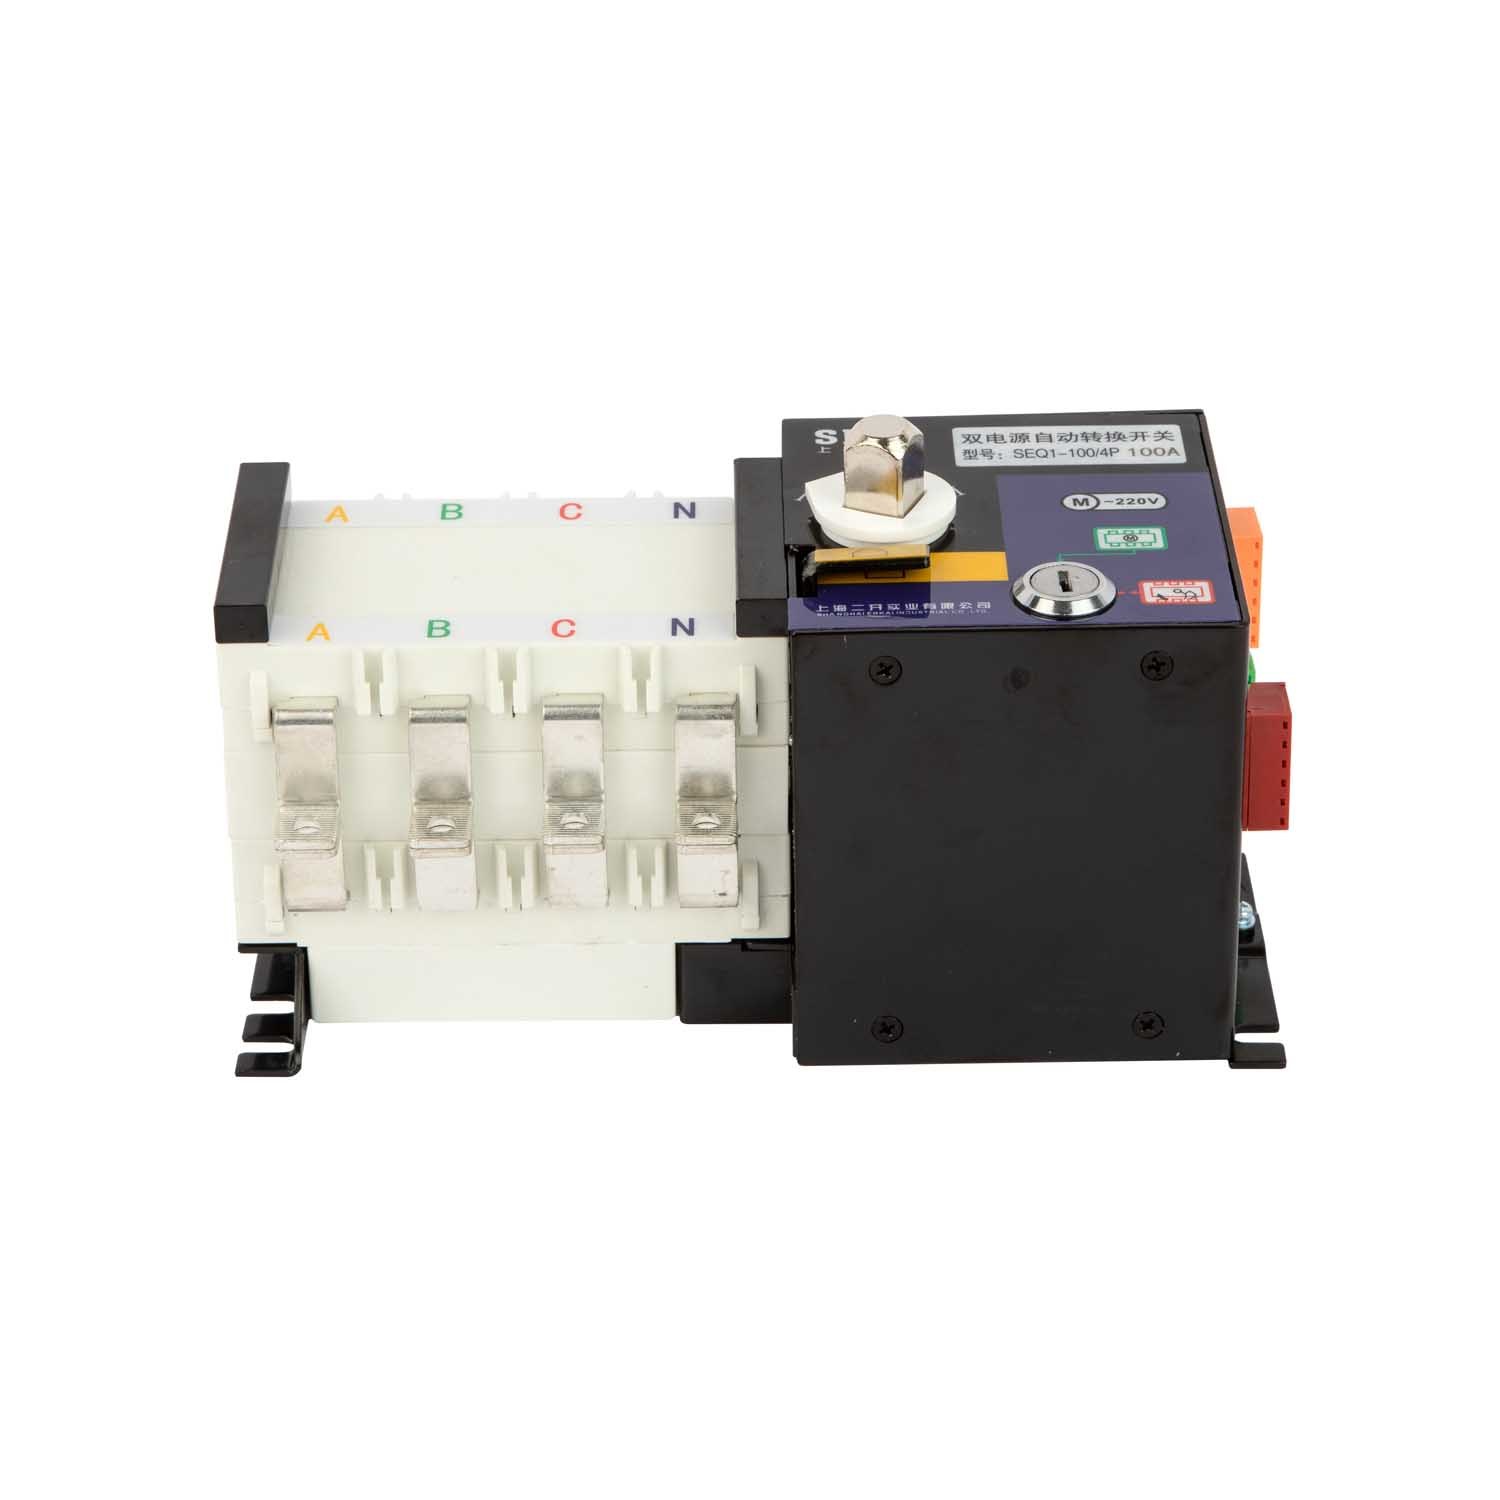 Dual Power Automatic Transfer Switch 4p 630A ATS